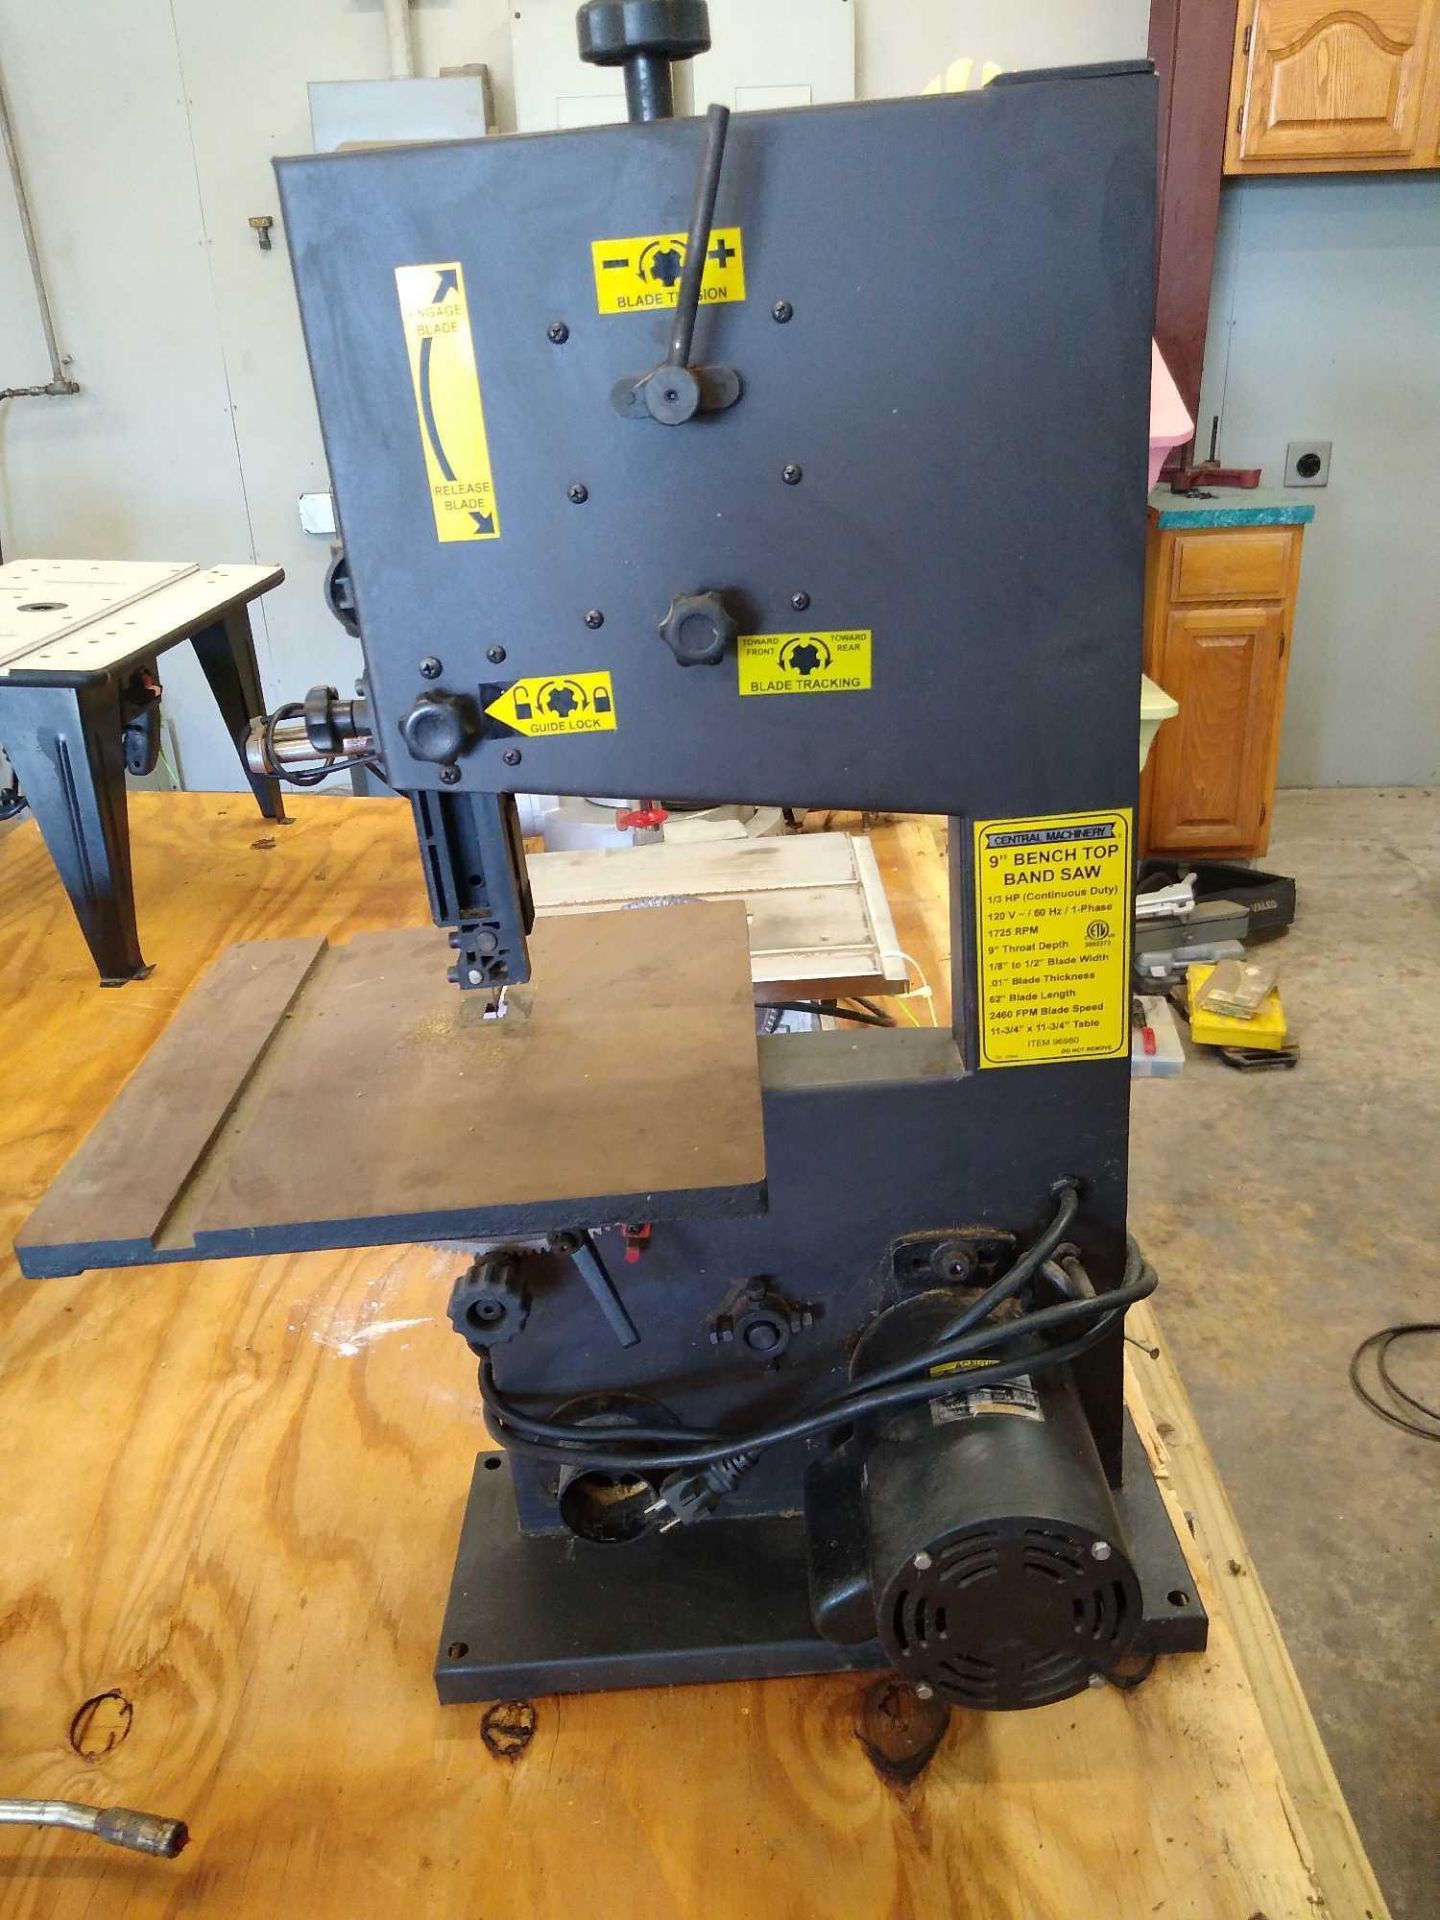 Central Machinery Model 96980 9" Bench Top Band Saw Manufacturer: Central Machinery Model: 96980 Mot